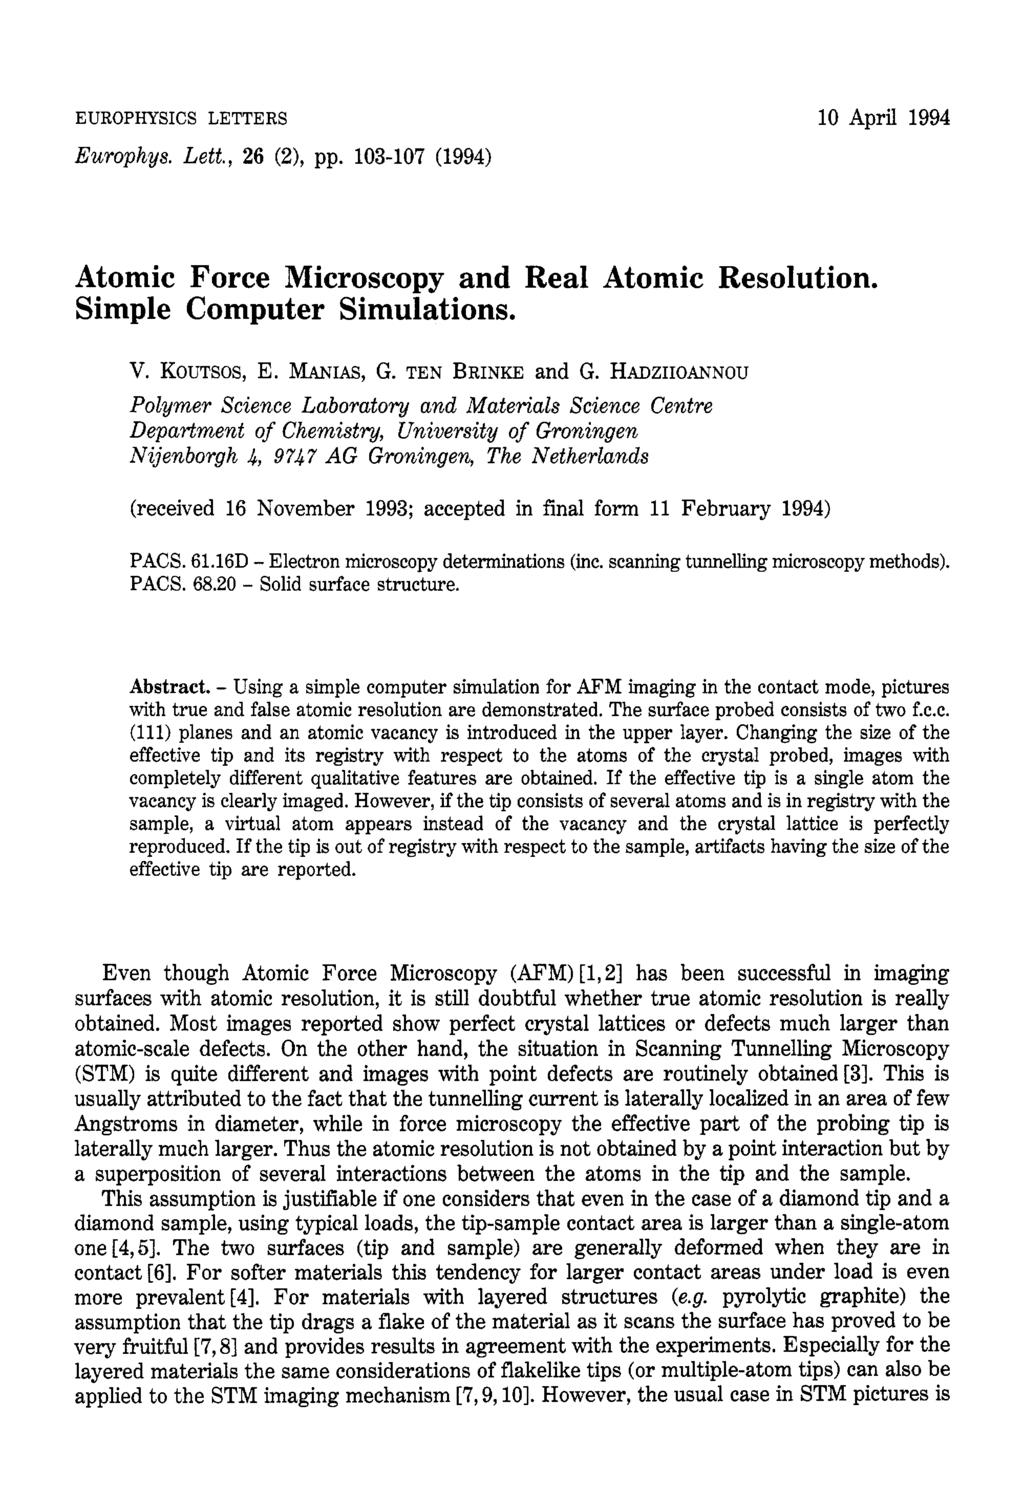 EUROPHYSICS LETTERS Europhys. Lett., 26 (2), pp. 103-107 (1994) 10 April 1994 Atomic Force Microscopy and Real Atomic Resolution. Simple Computer Simulations. V. KOUTSOS, E. MANIAS, G.